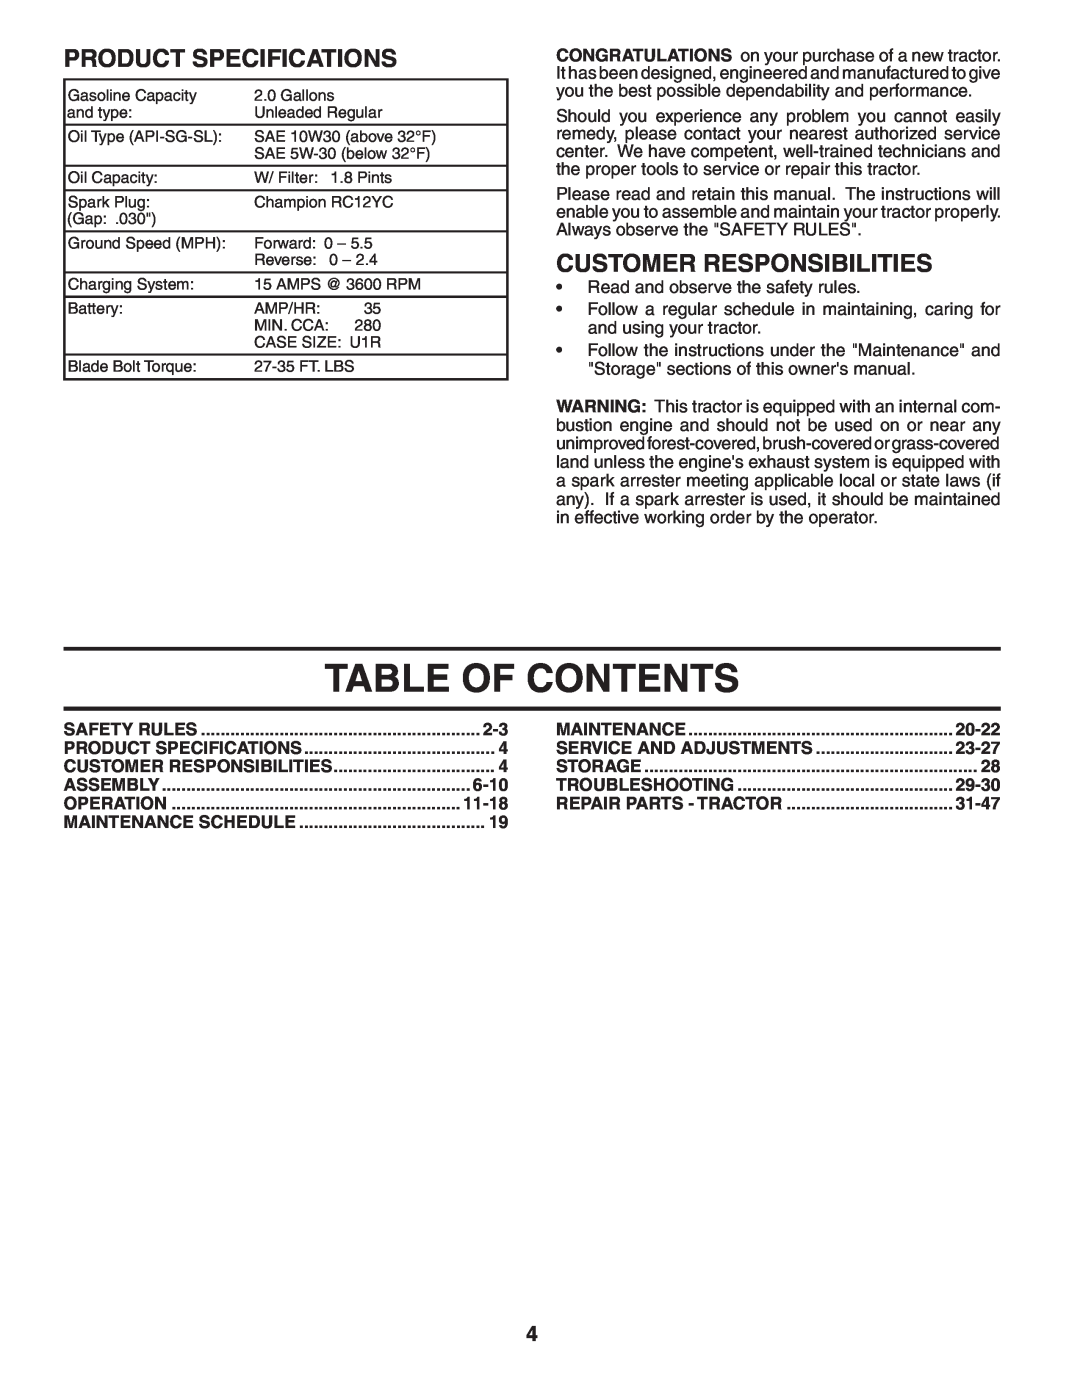 Husqvarna CTH2542 XP owner manual Table Of Contents, Product Specifications, Customer Responsibilities 